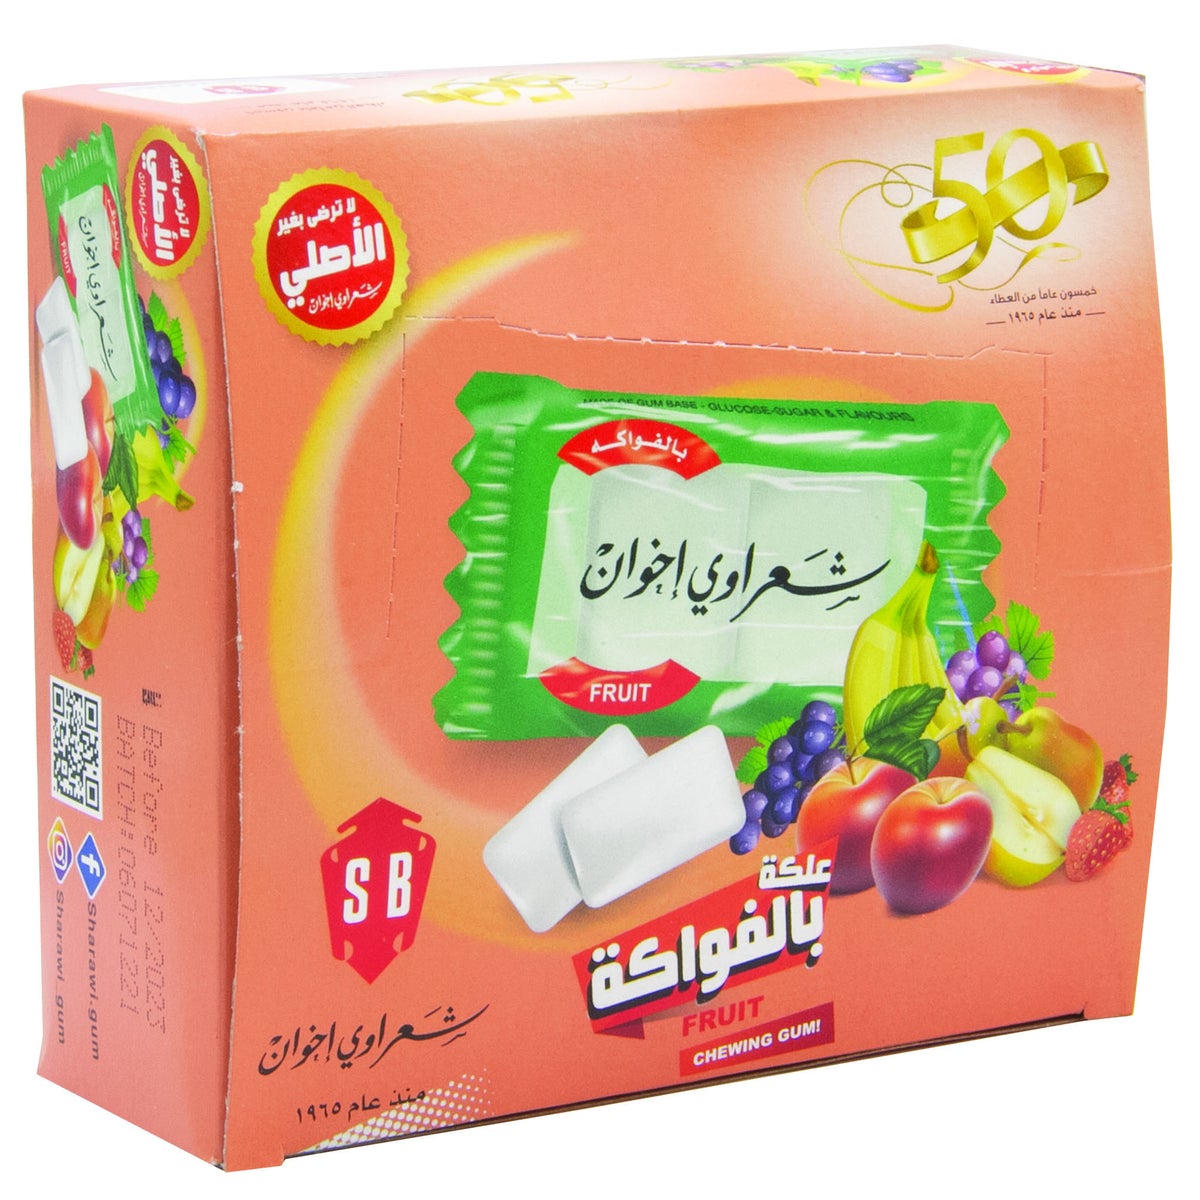 Sharawi Fruit Chewing Gum 100 Ct. x 24 (290g)